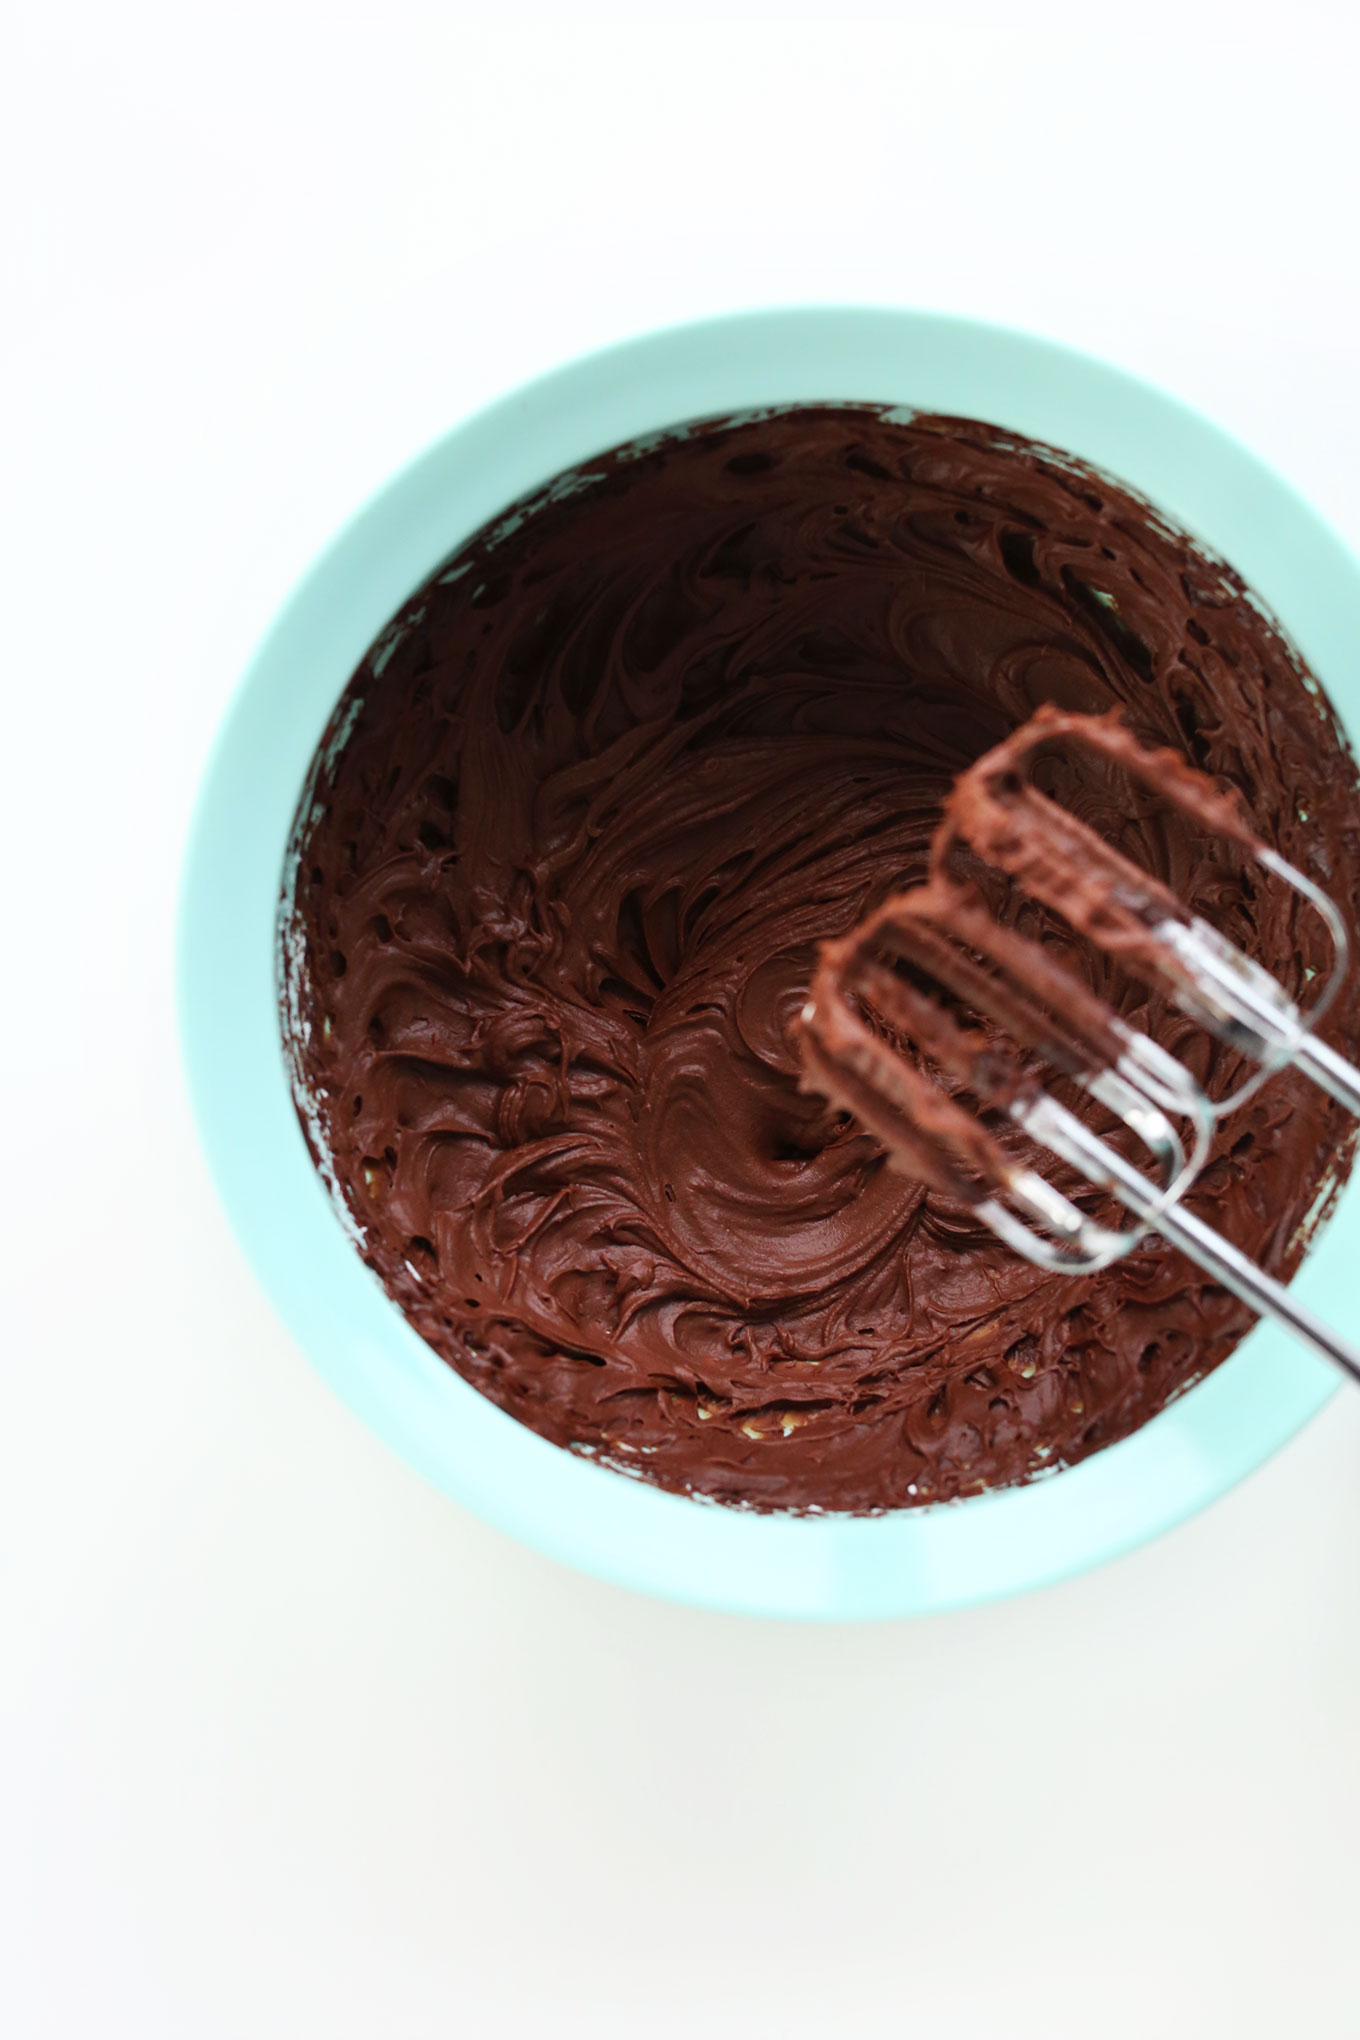 Electric mixer blades resting over a bowl of Vegan Chocolate Ganache Frosting